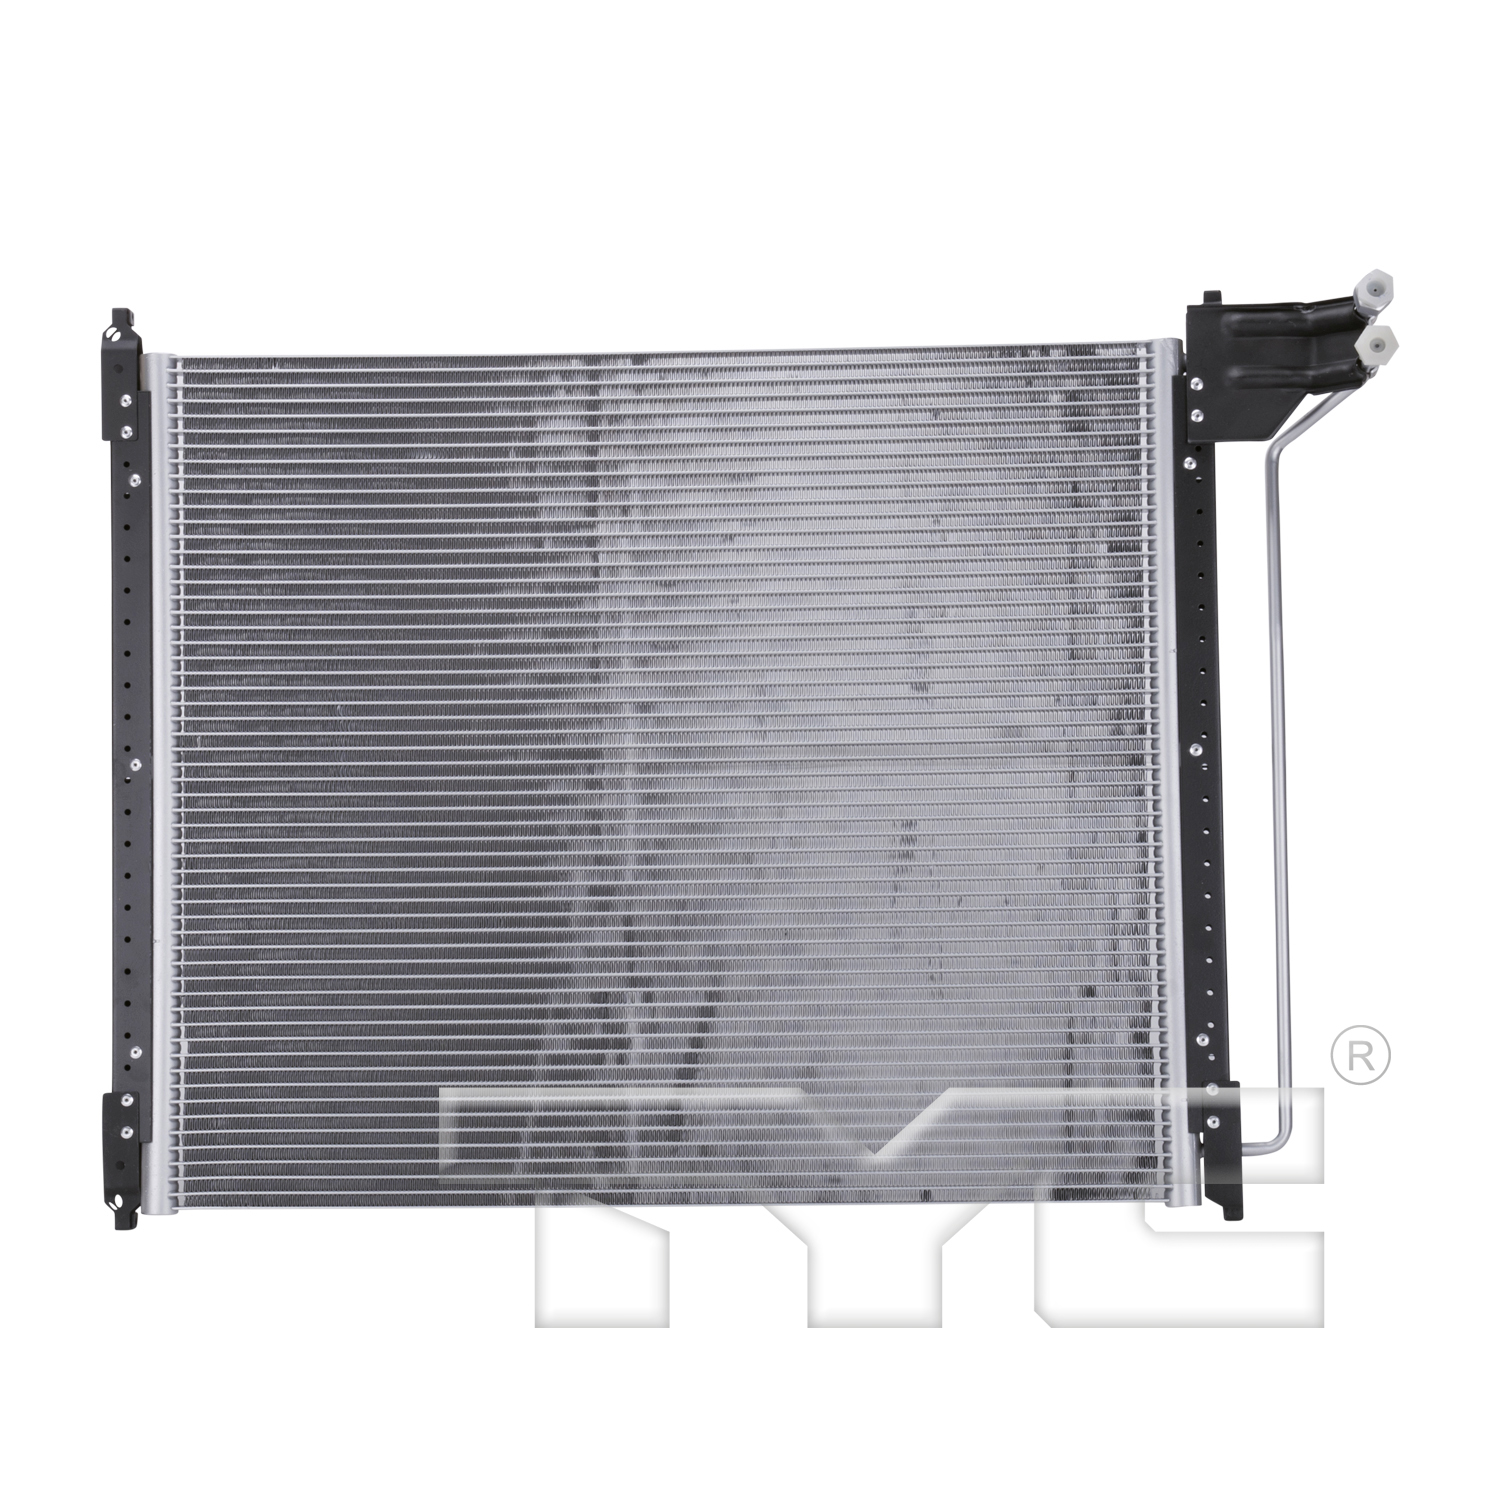 Aftermarket AC CONDENSERS for FORD - E-550 SUPER DUTY, E-550 SUPER DUTY,03-03,Air conditioning condenser